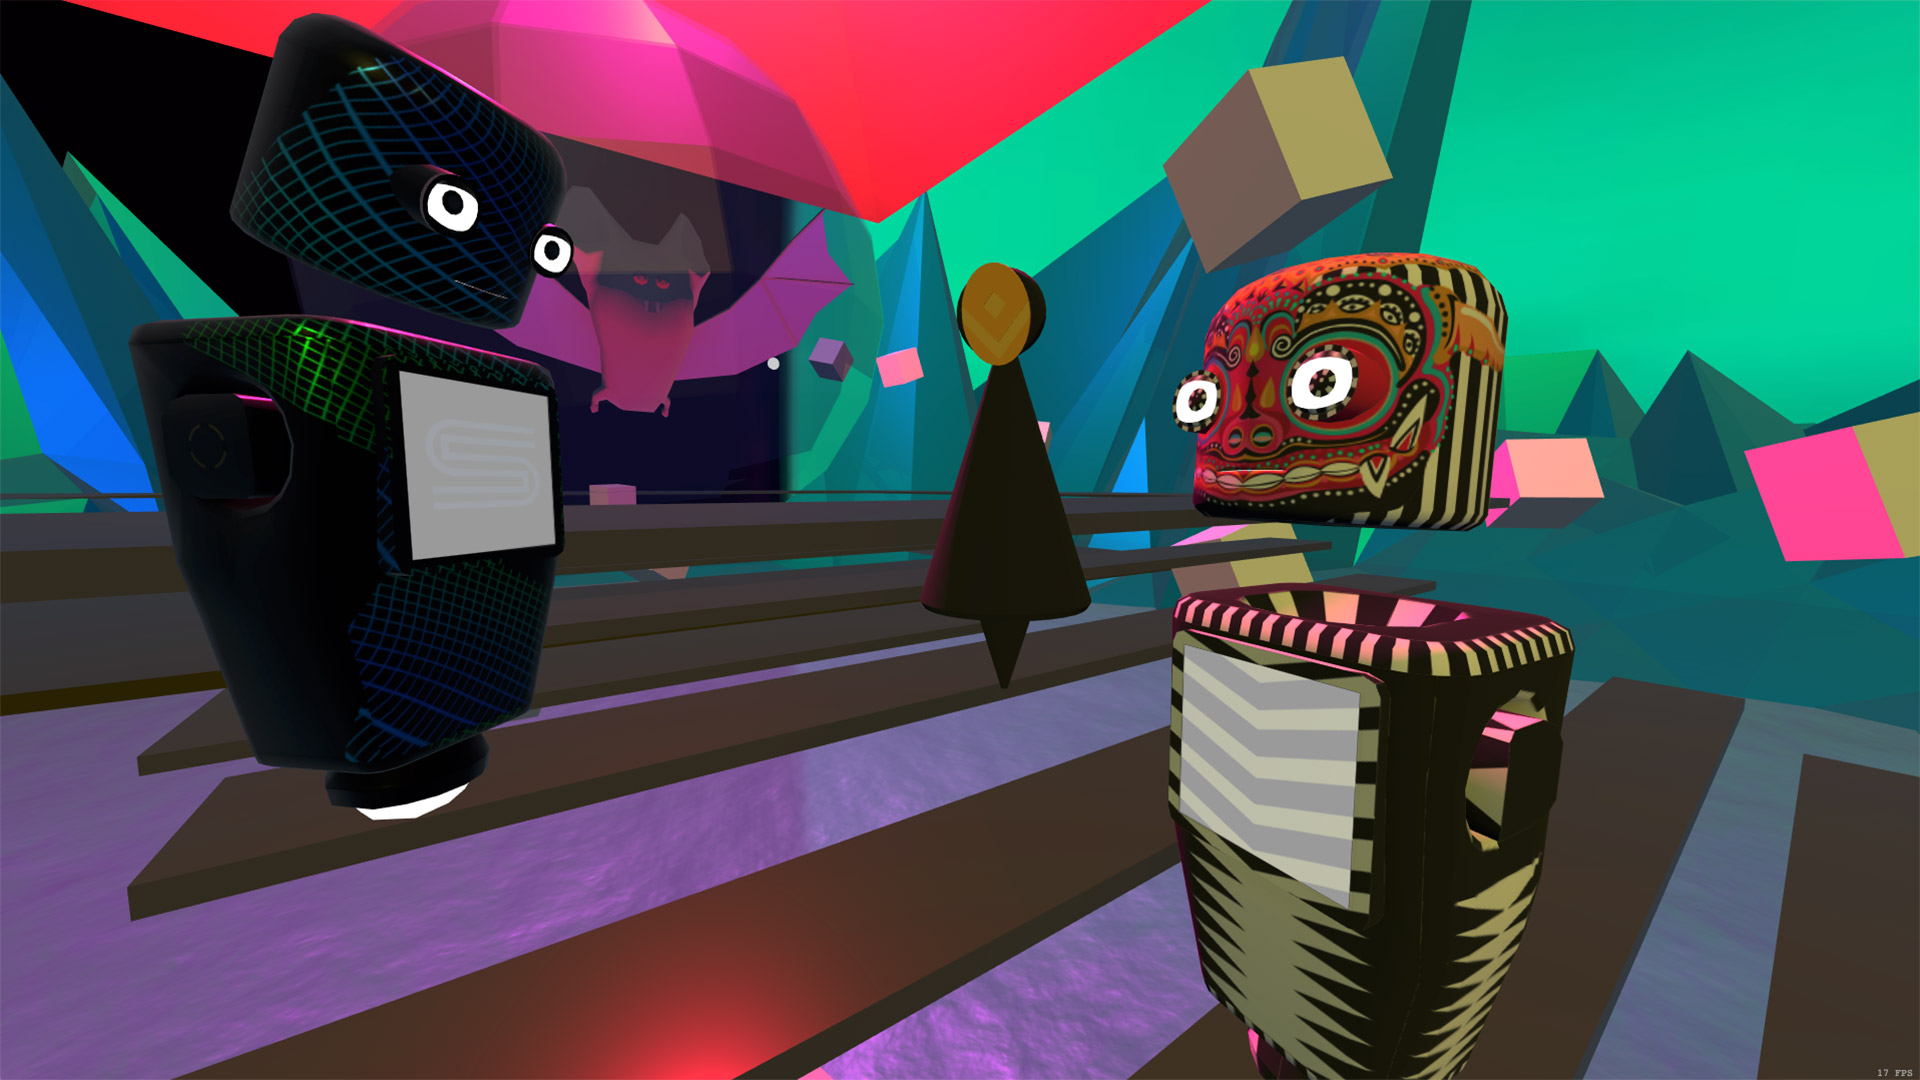 virtual avatars talking in a colorful environment